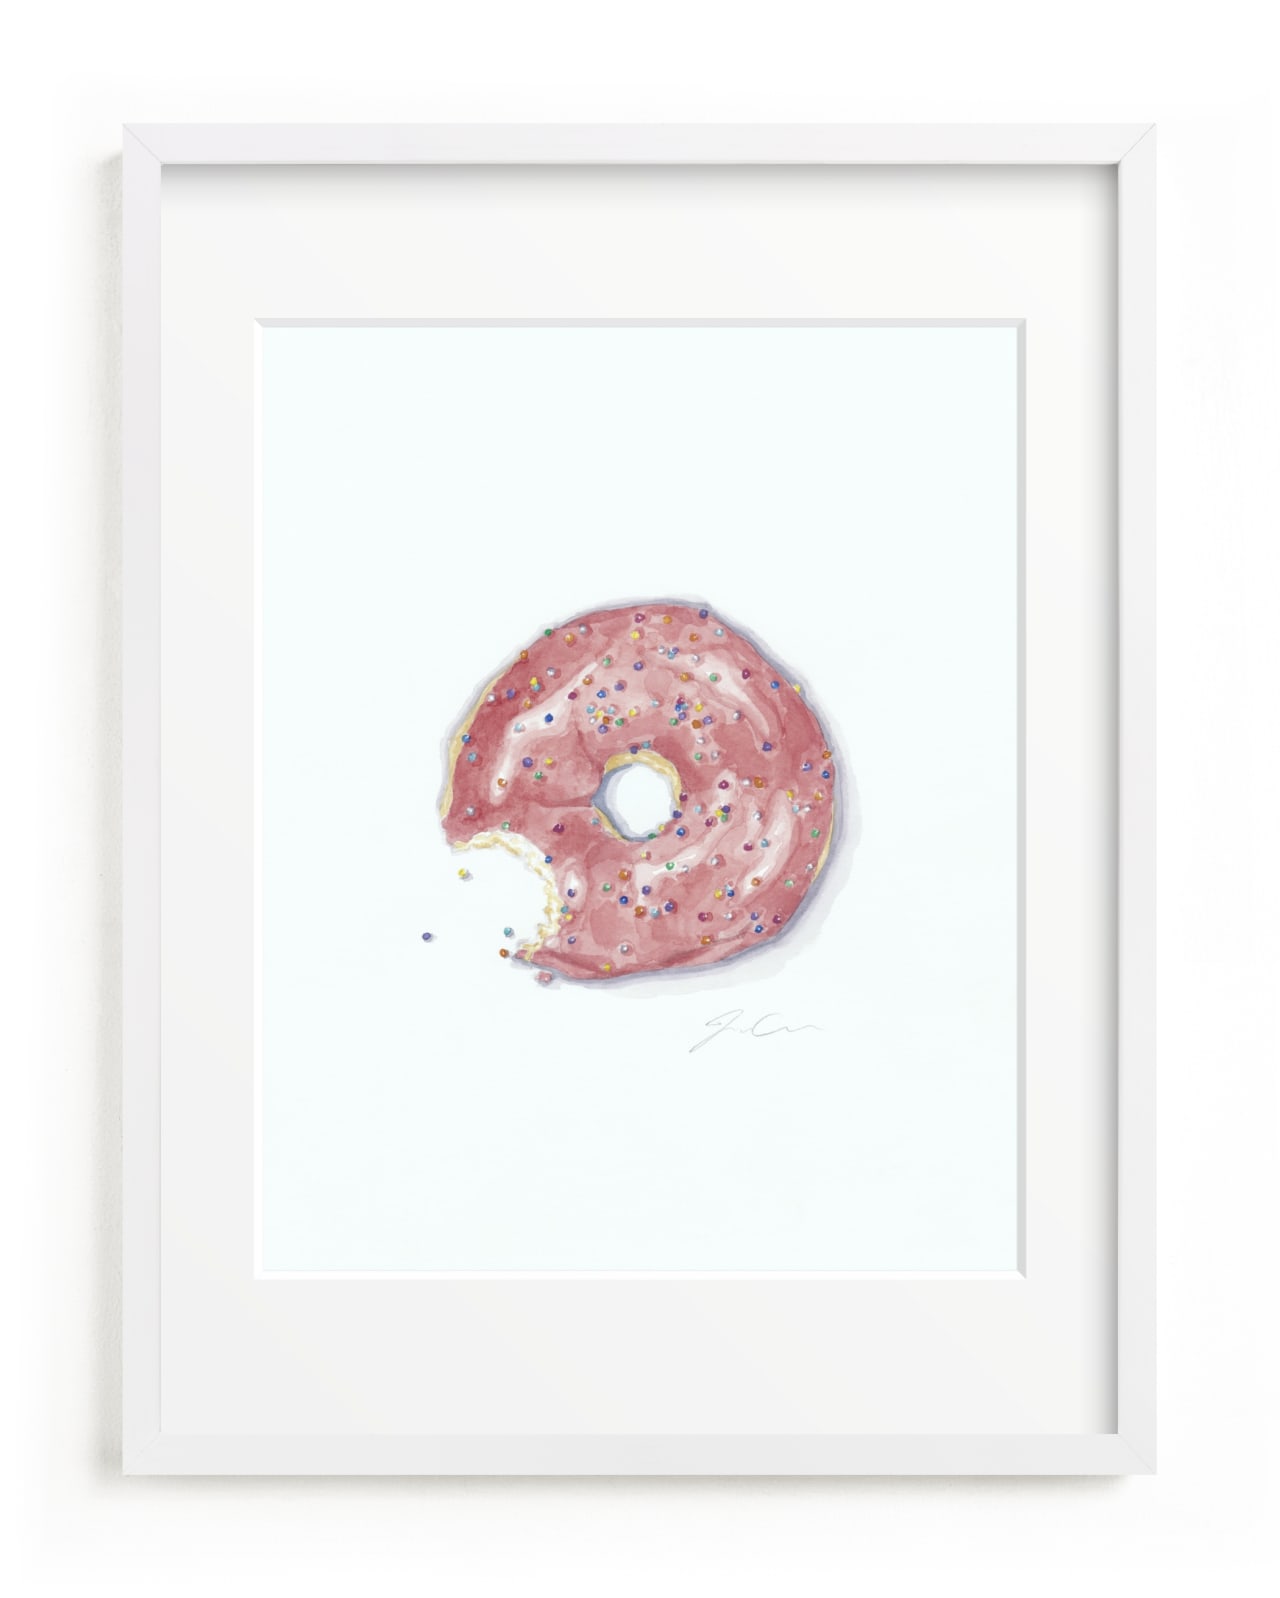 This is a colorful kids wall art by Jackie Graham called This is not a Donut Whole.